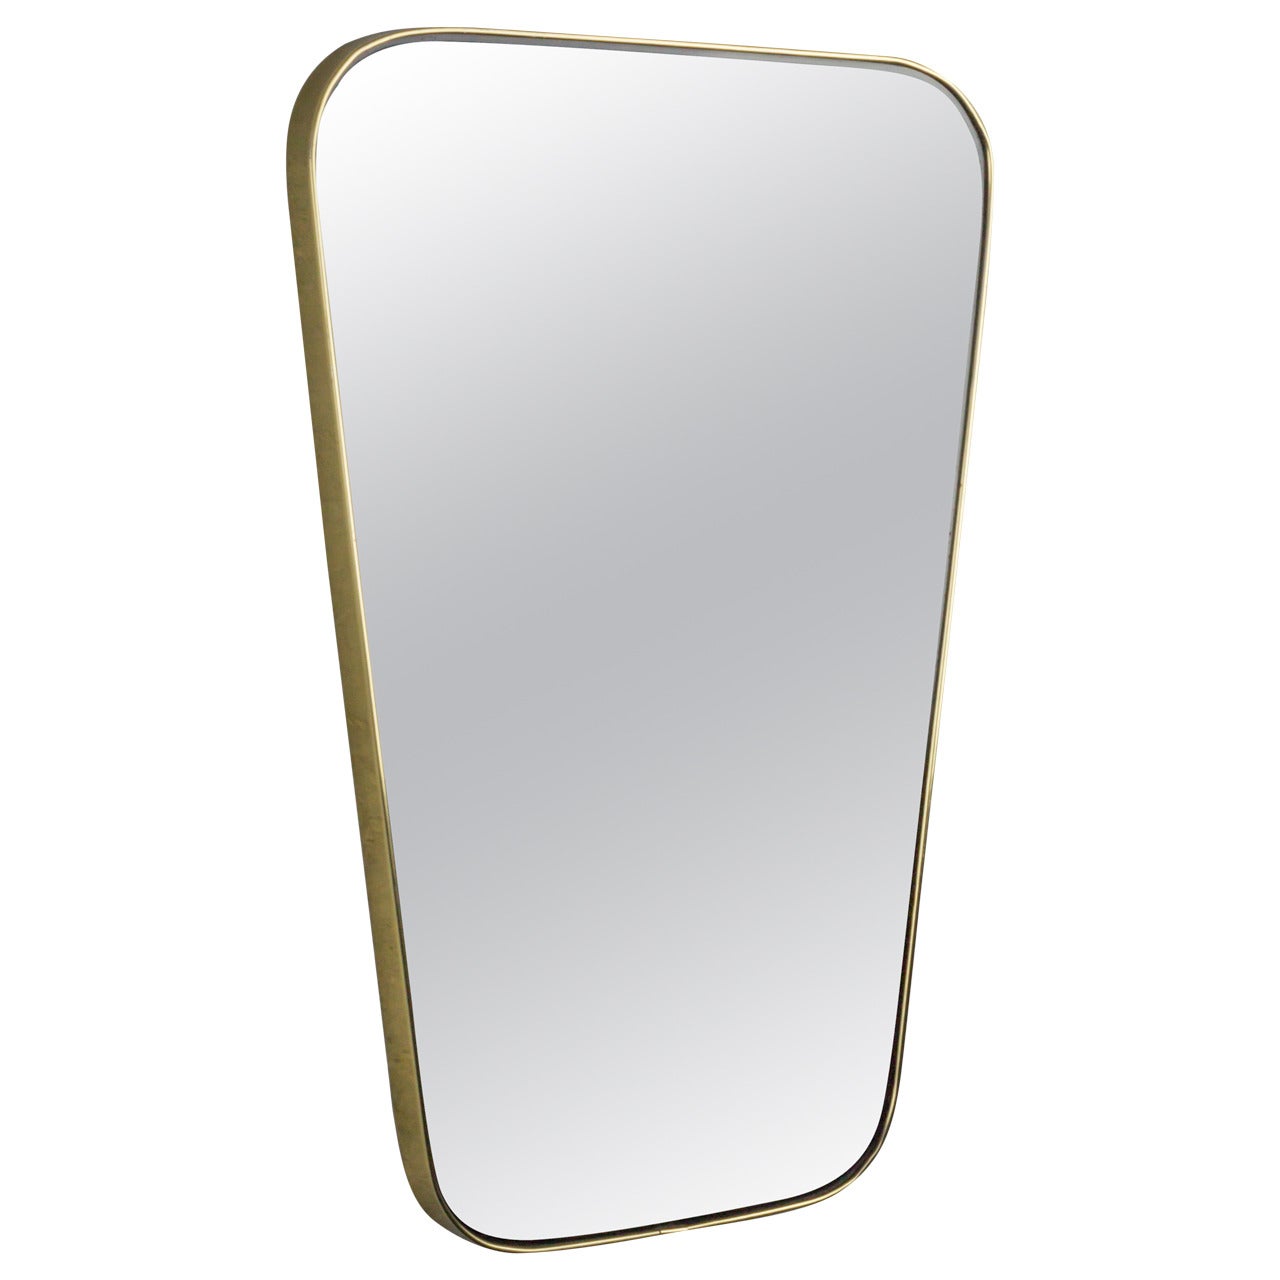 Trapezoid Italian Mirror with Rounded Corners in Metal Frame